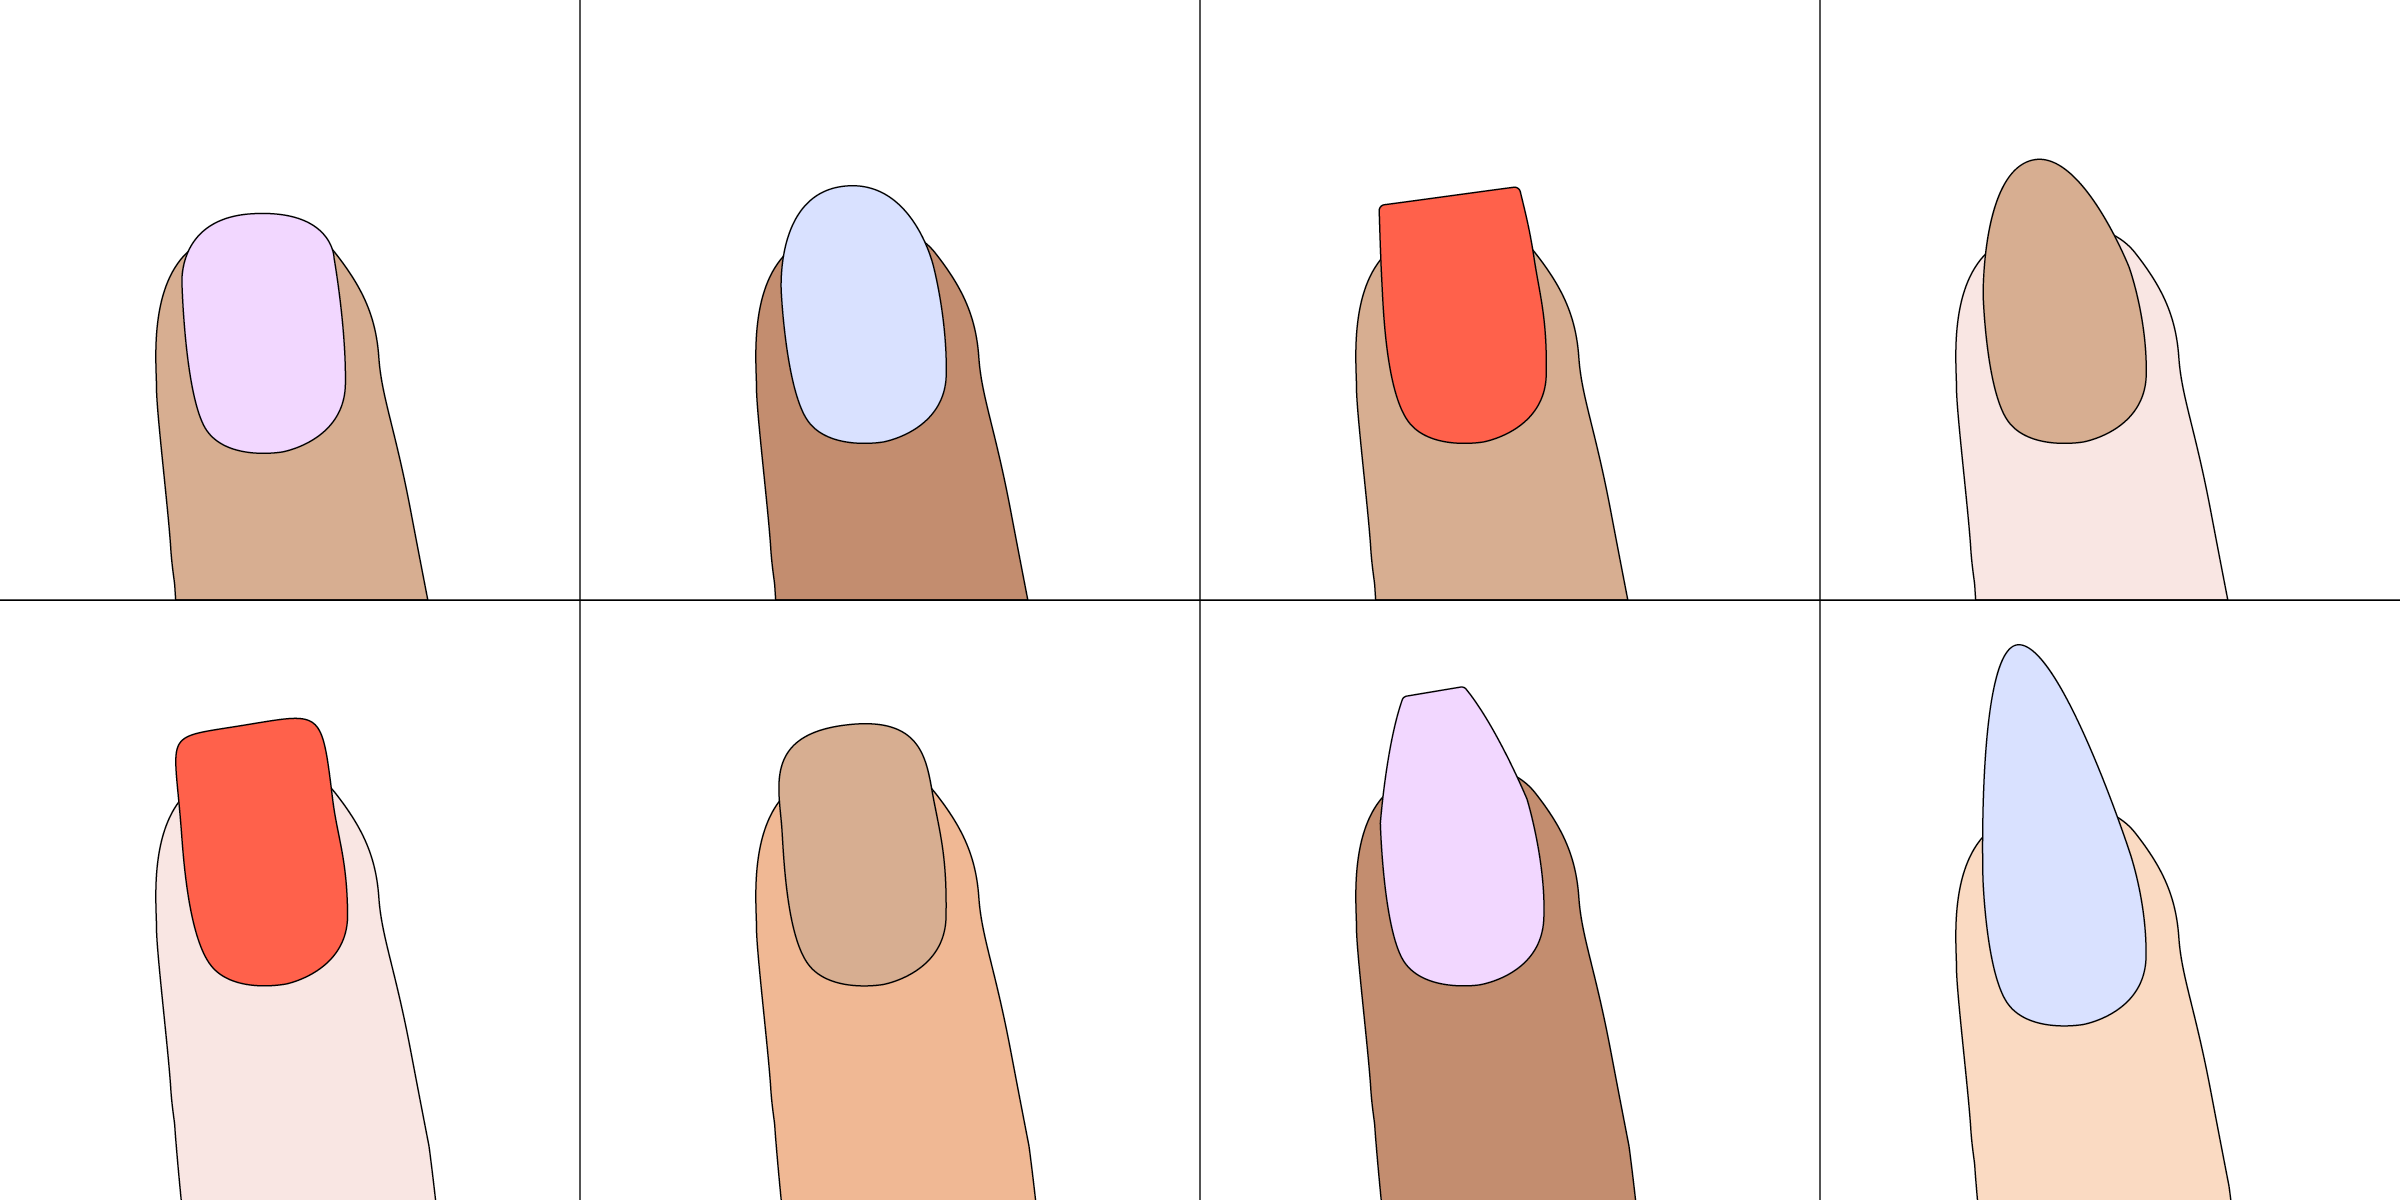 23WB BLOG ARTICLE How to find the best nail shape for your hands Hero 7f19e1ce 3ba7 4720 8784 6814bf1ddc93